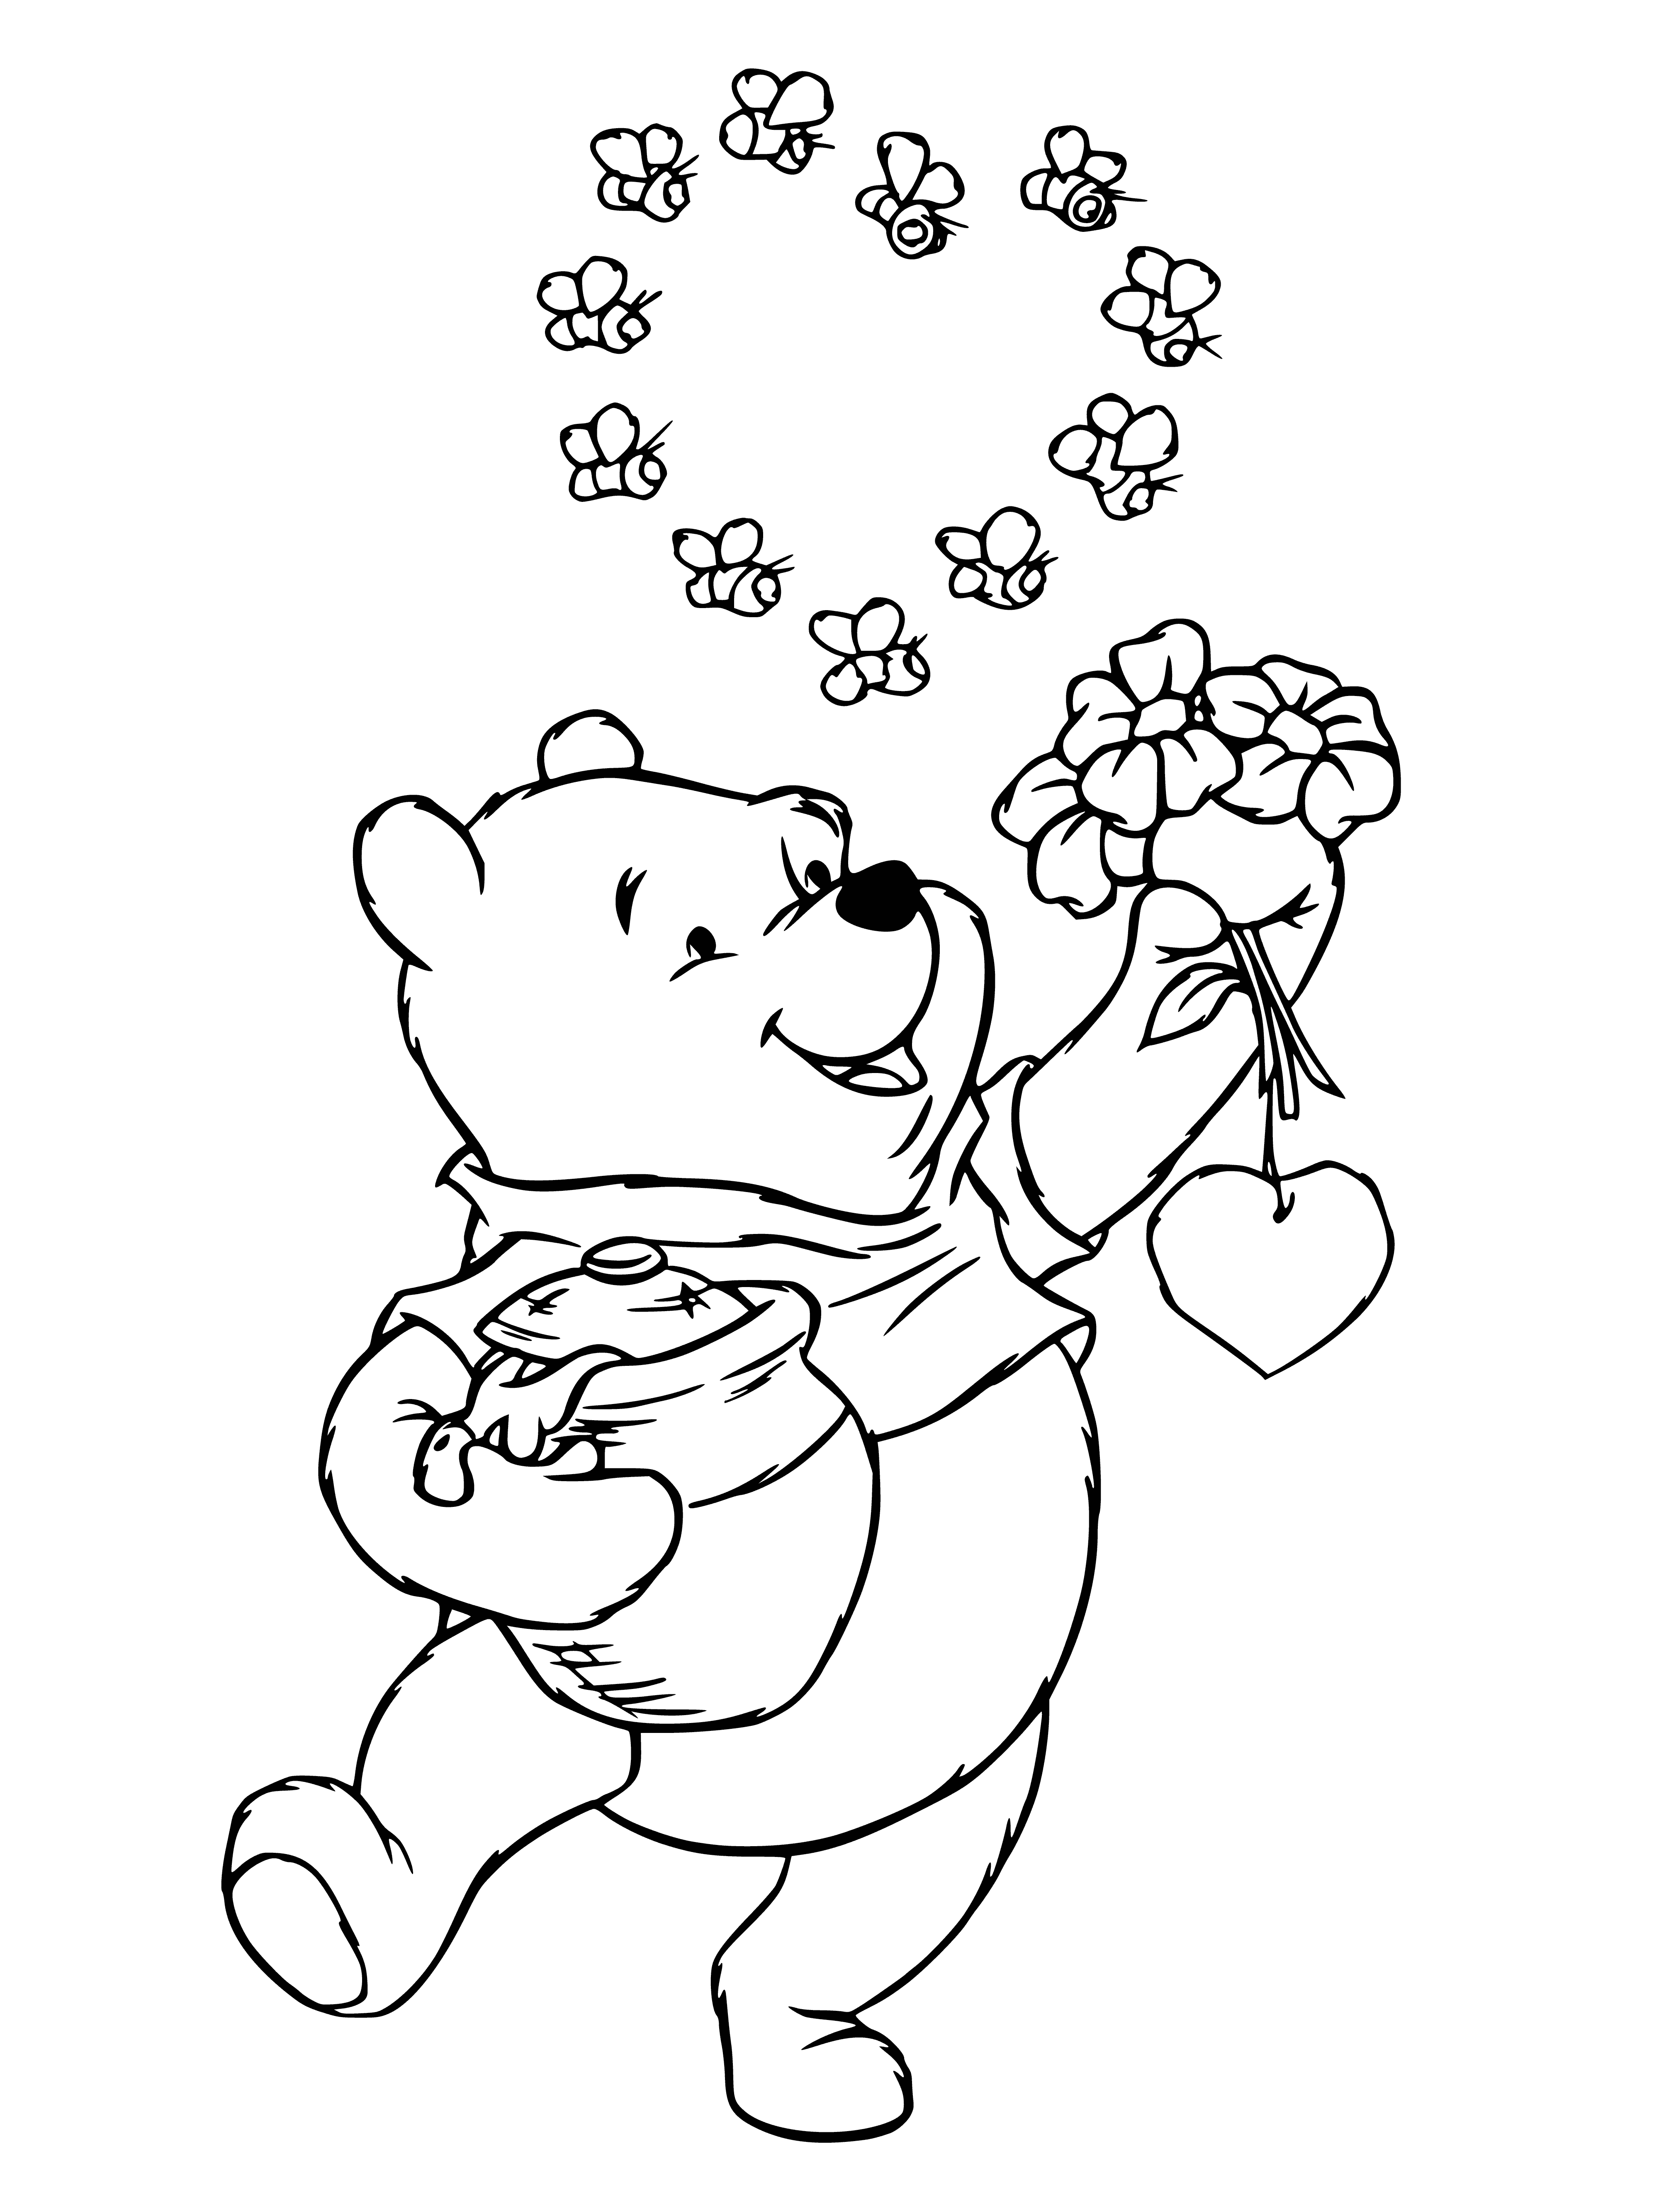 coloring page: Pooh eating honey in a tree surrounded by buzzing bees.